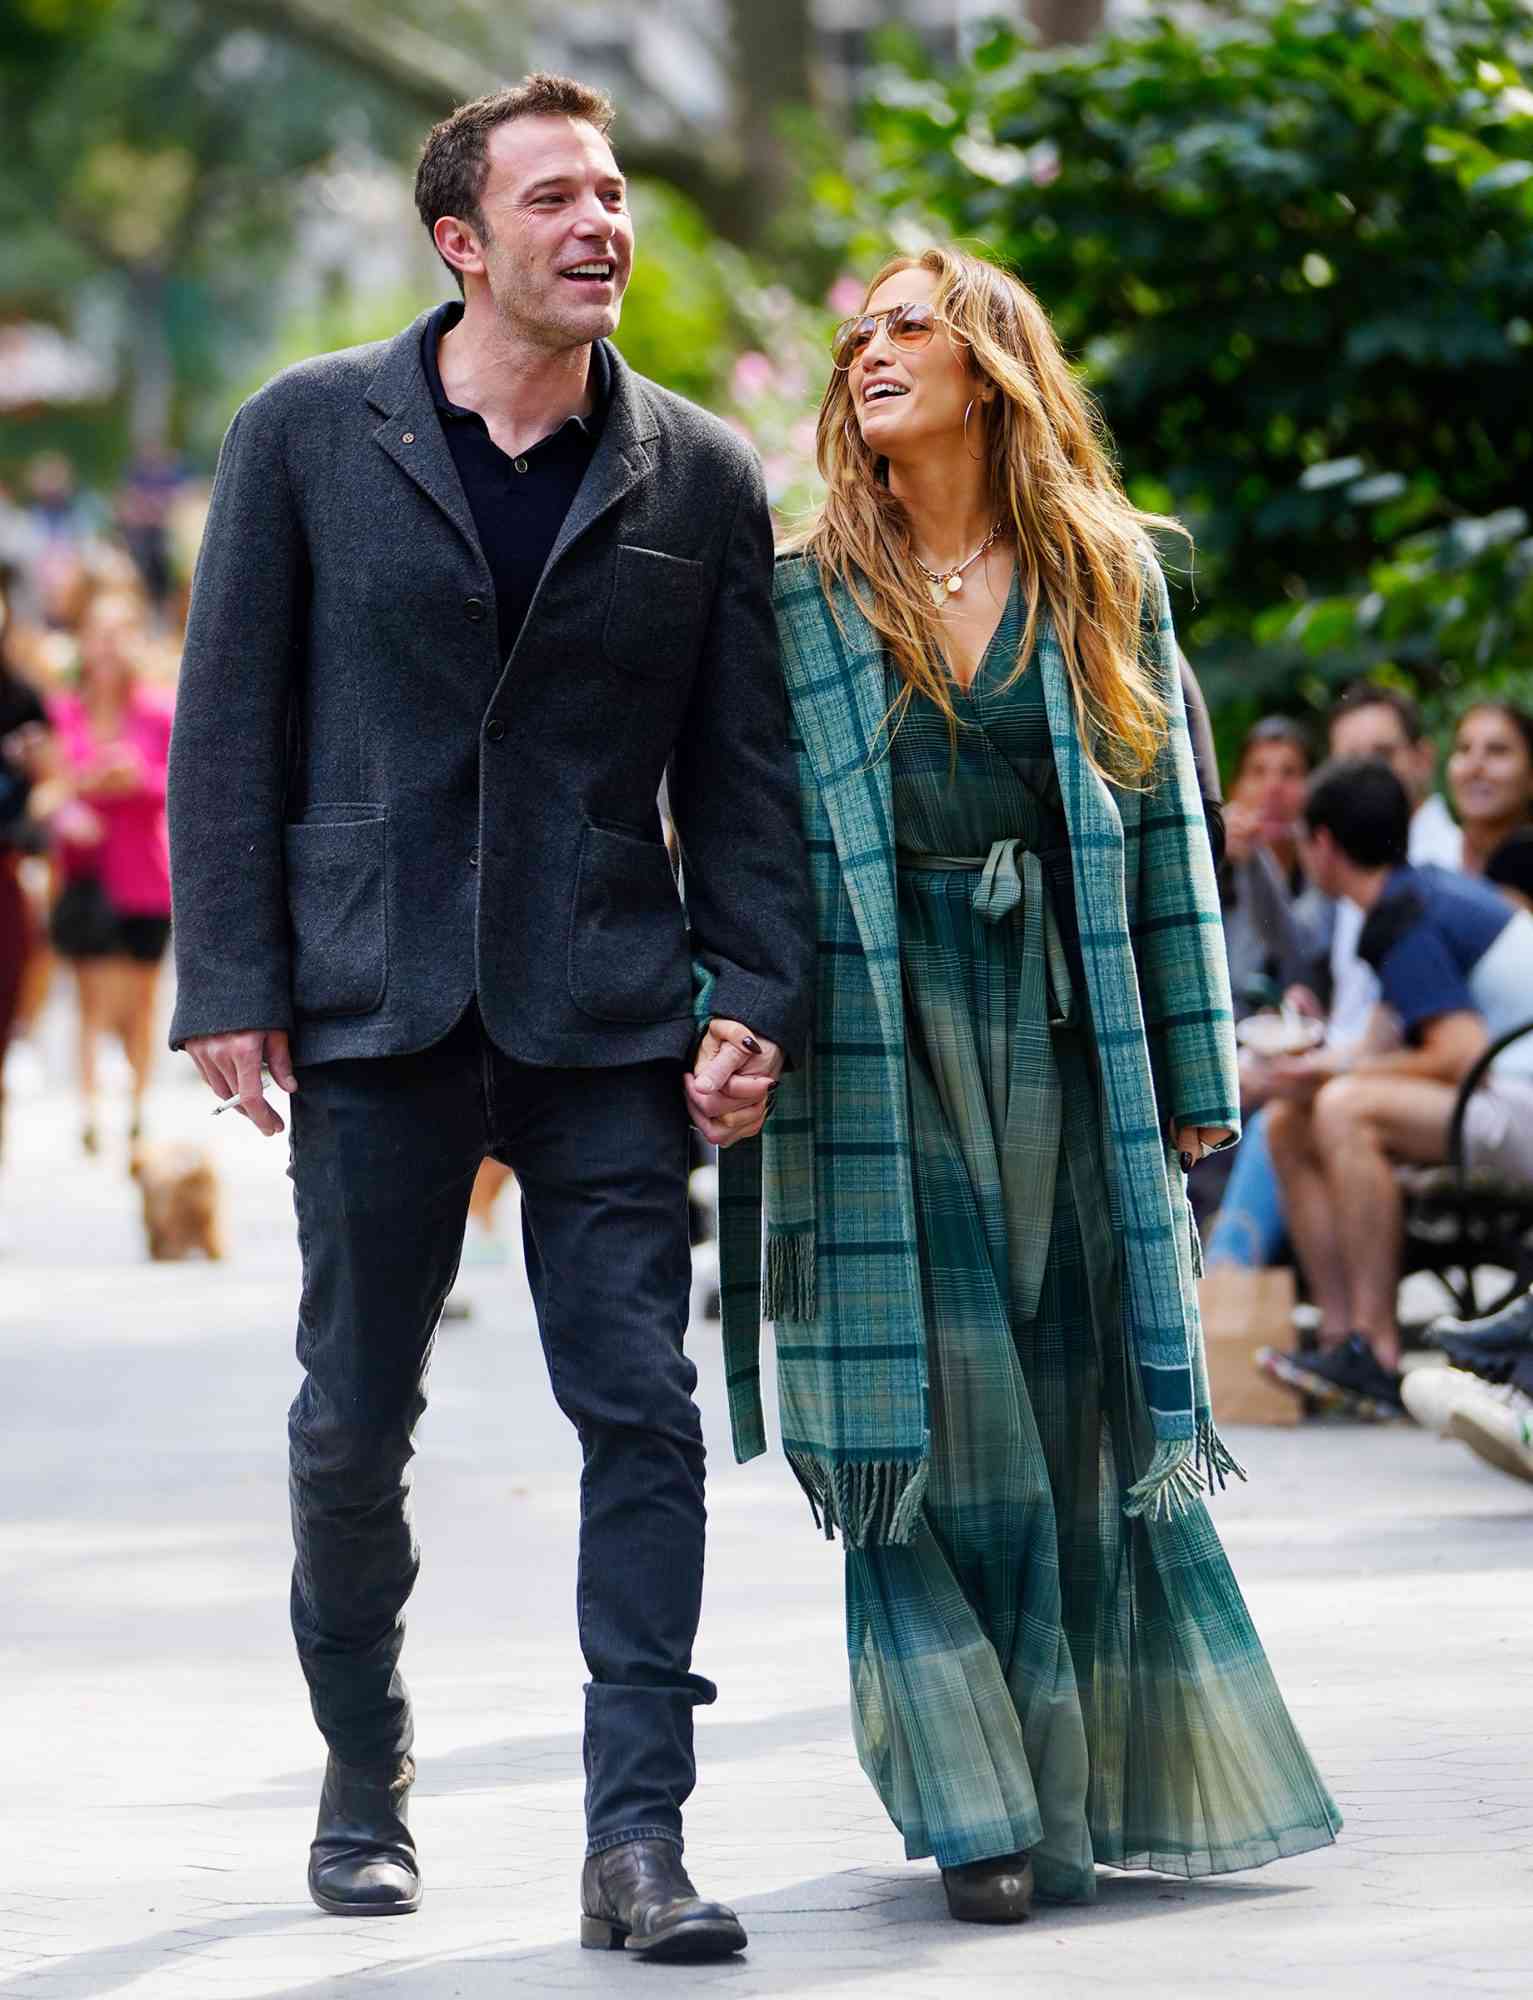 Jennifer Lopez and Ben Affleck are seen on September 26, 2021 in New York City